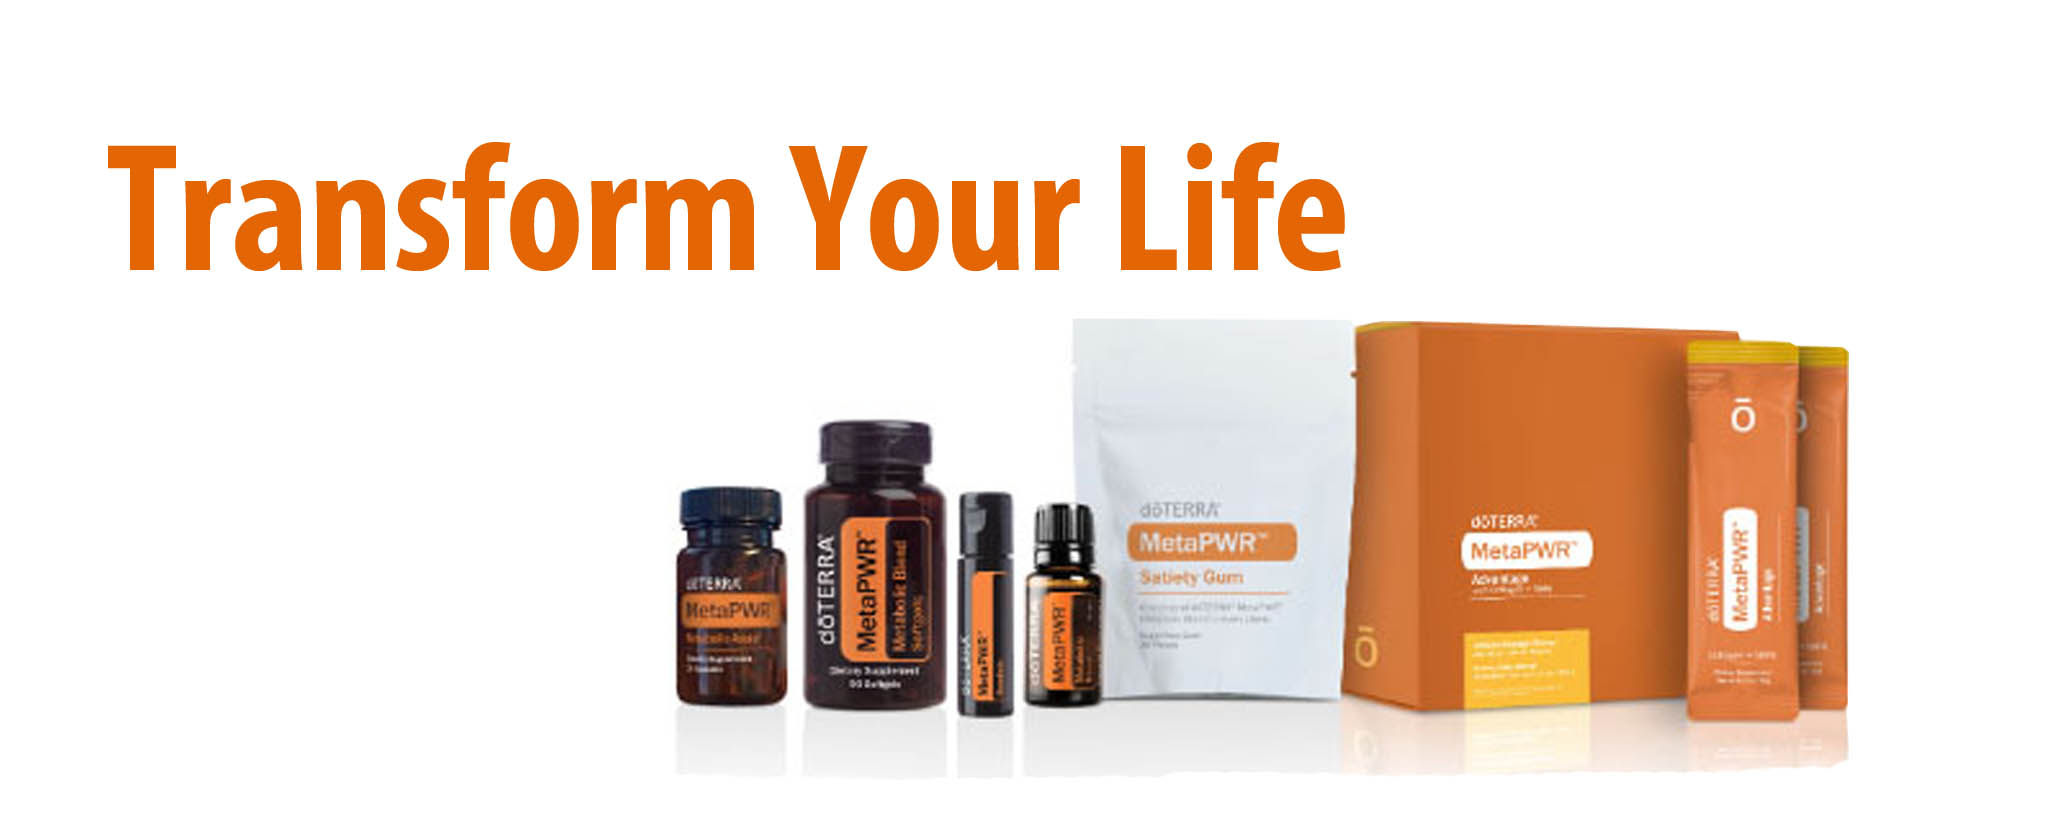 MetaPWR Supplement System & Program to Transform Your Life